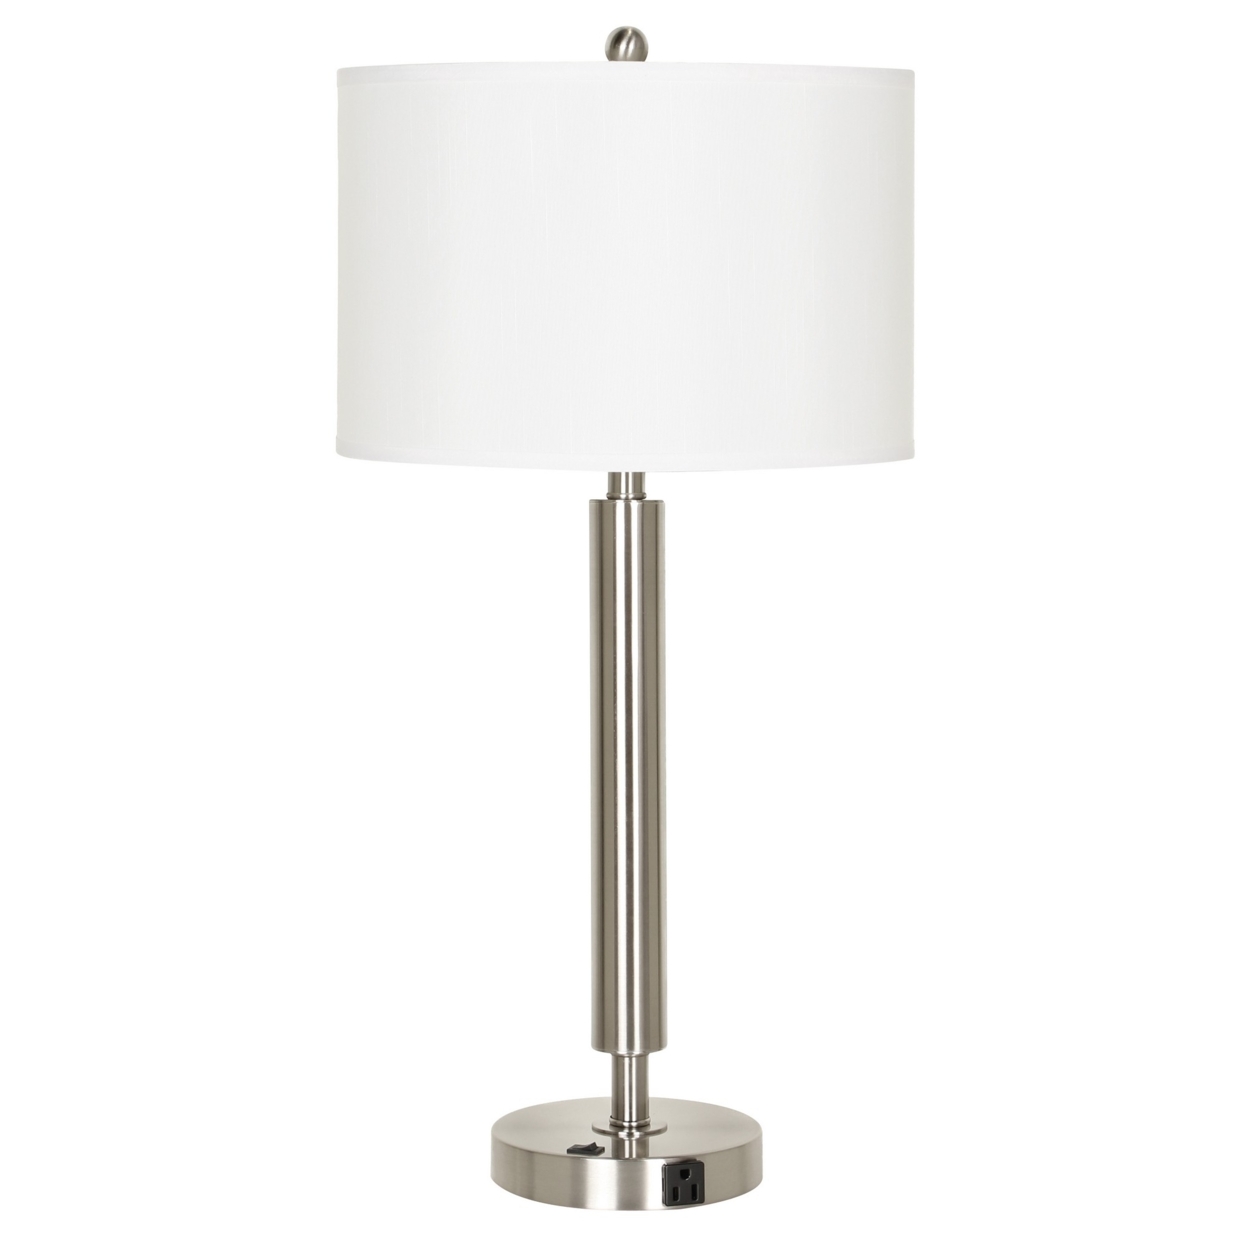 Metal Table Lamp With Fabric Drum Shade, White And Silver- Saltoro Sherpi